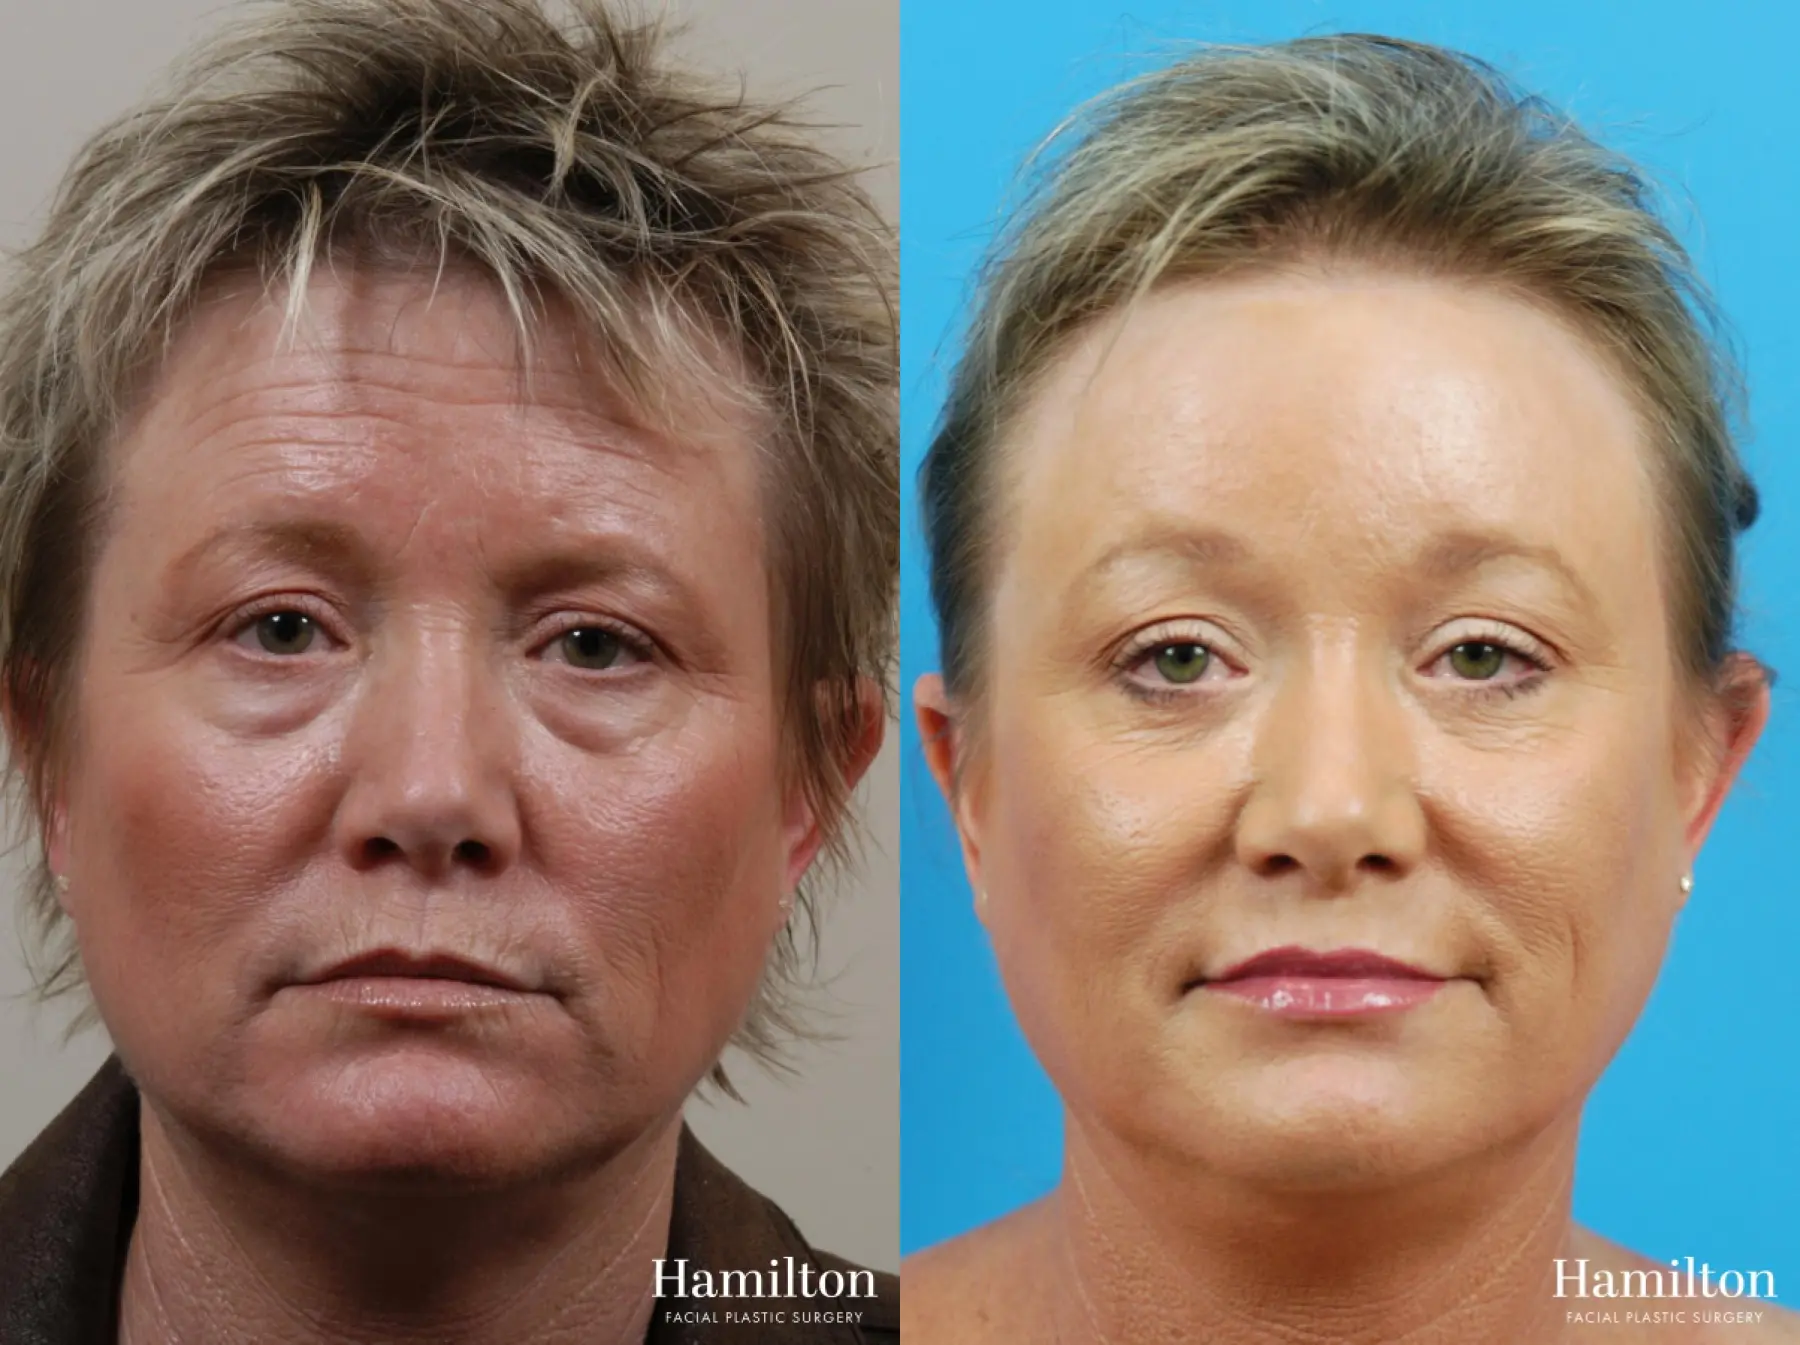 C02 Laser: Patient 2 - Before and After 1